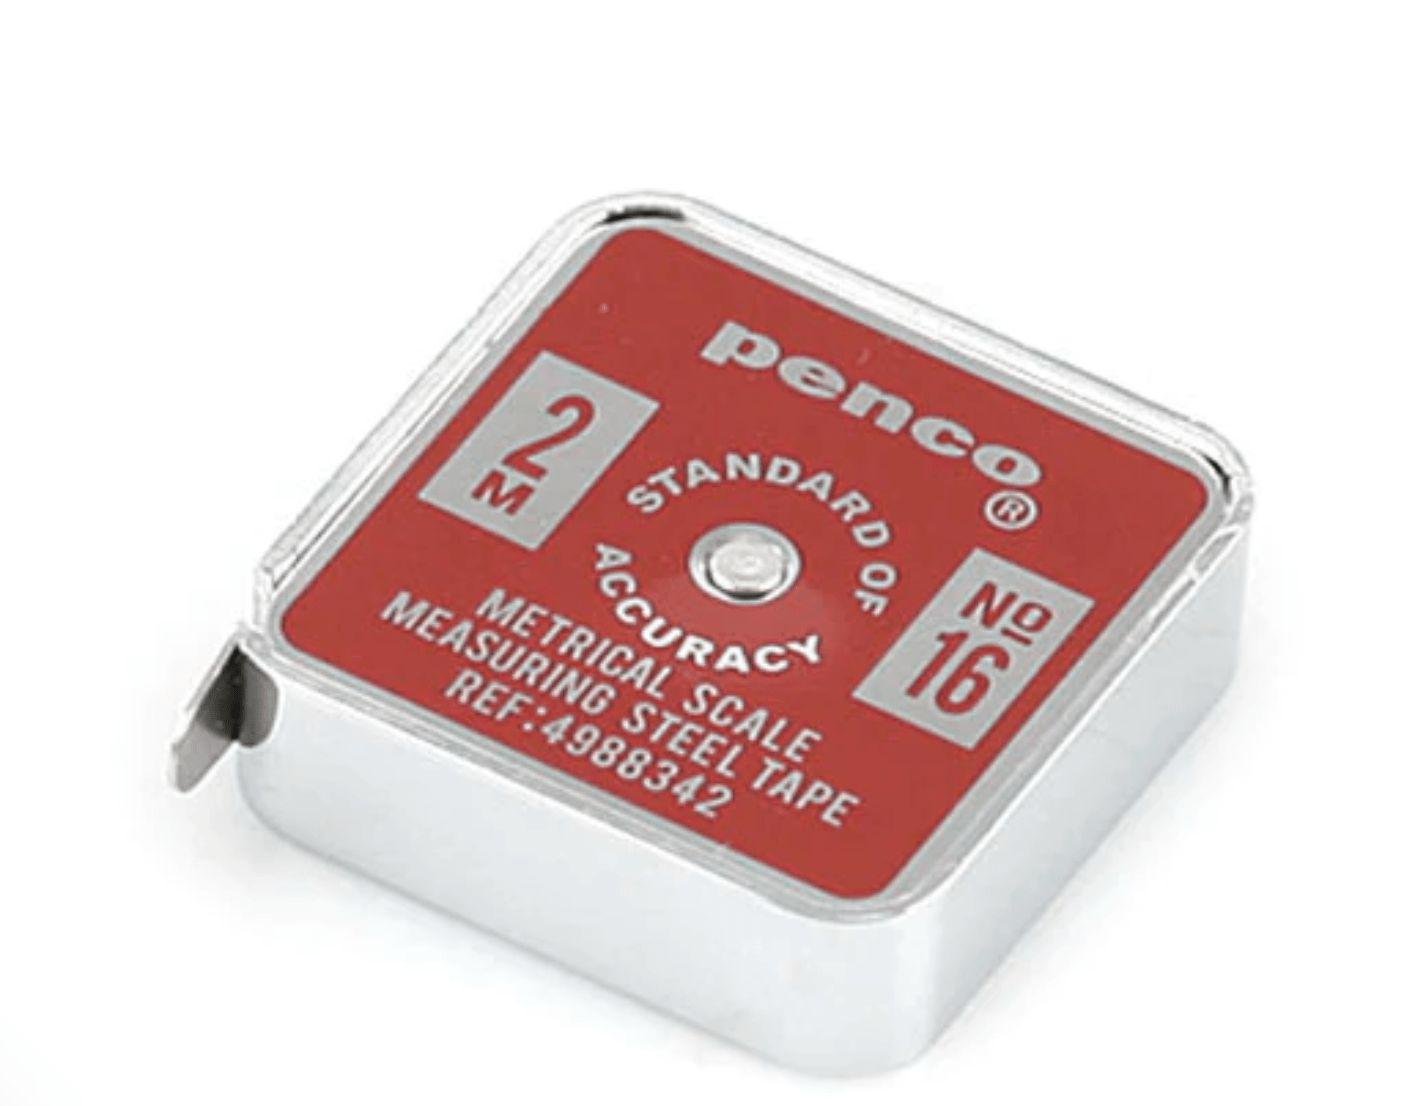 A small Pocket Metric Measure - Red with the brand name PENCO on it.